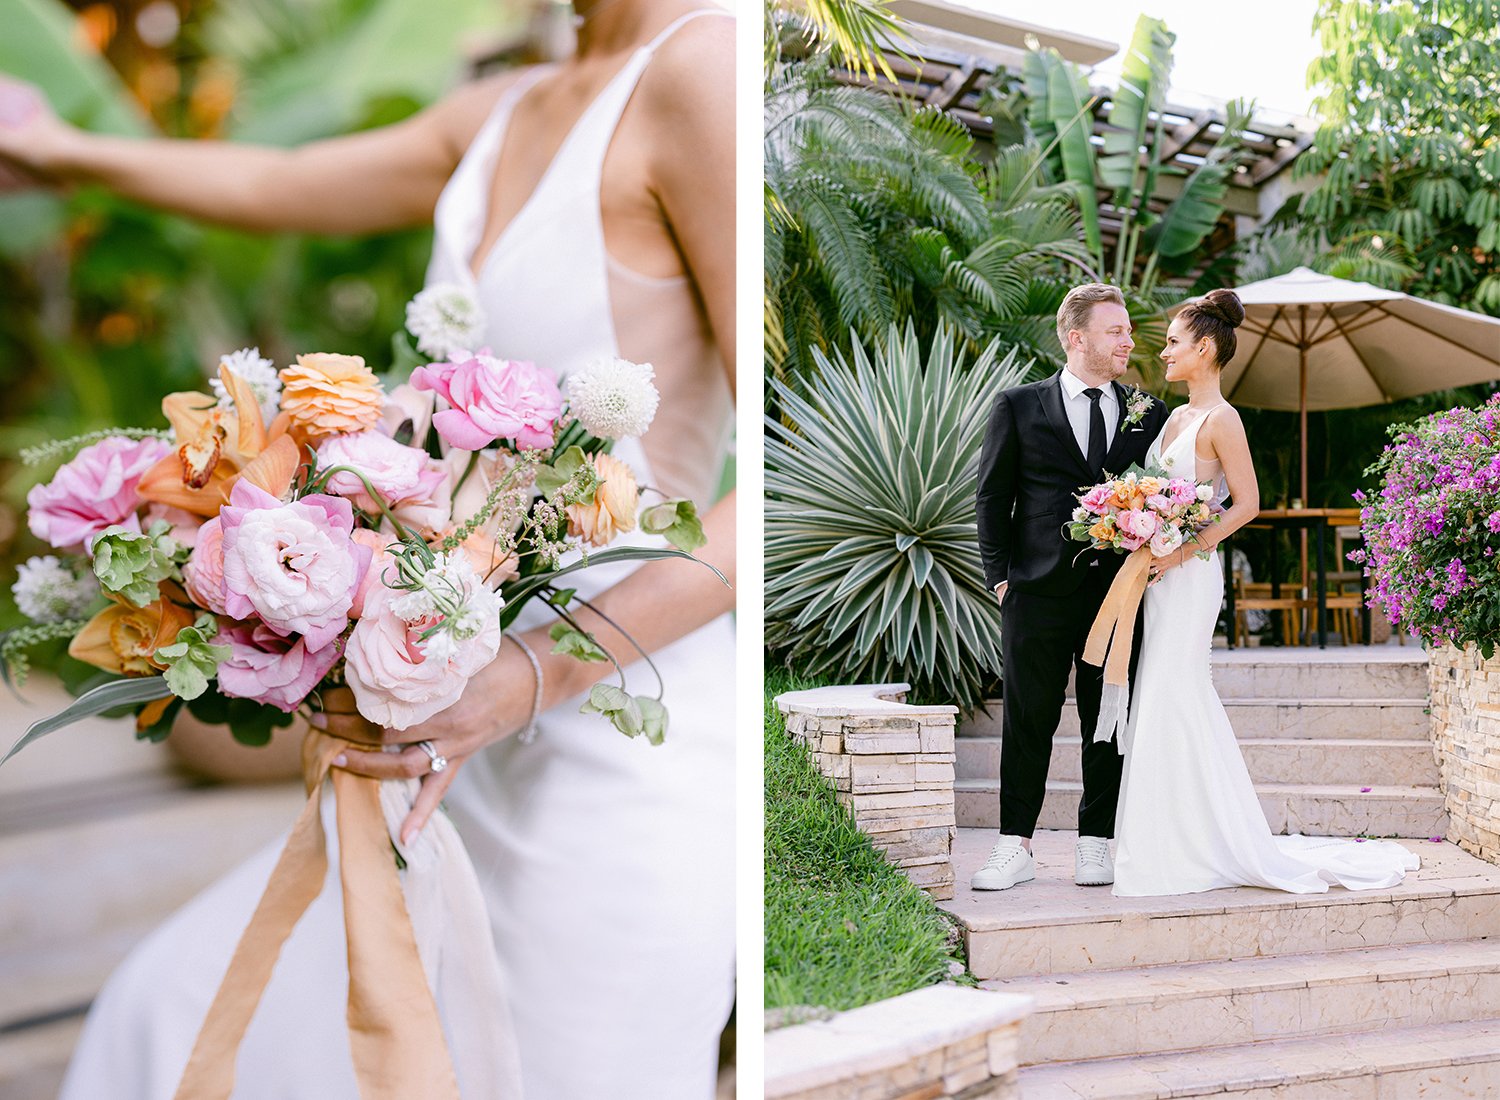 22 cute flower design for bride's bouquet, bride and groom smiling standing in stairs with green tropical plants behind at Rosewood Mayakoba Riviera Maya Cancun.JPG